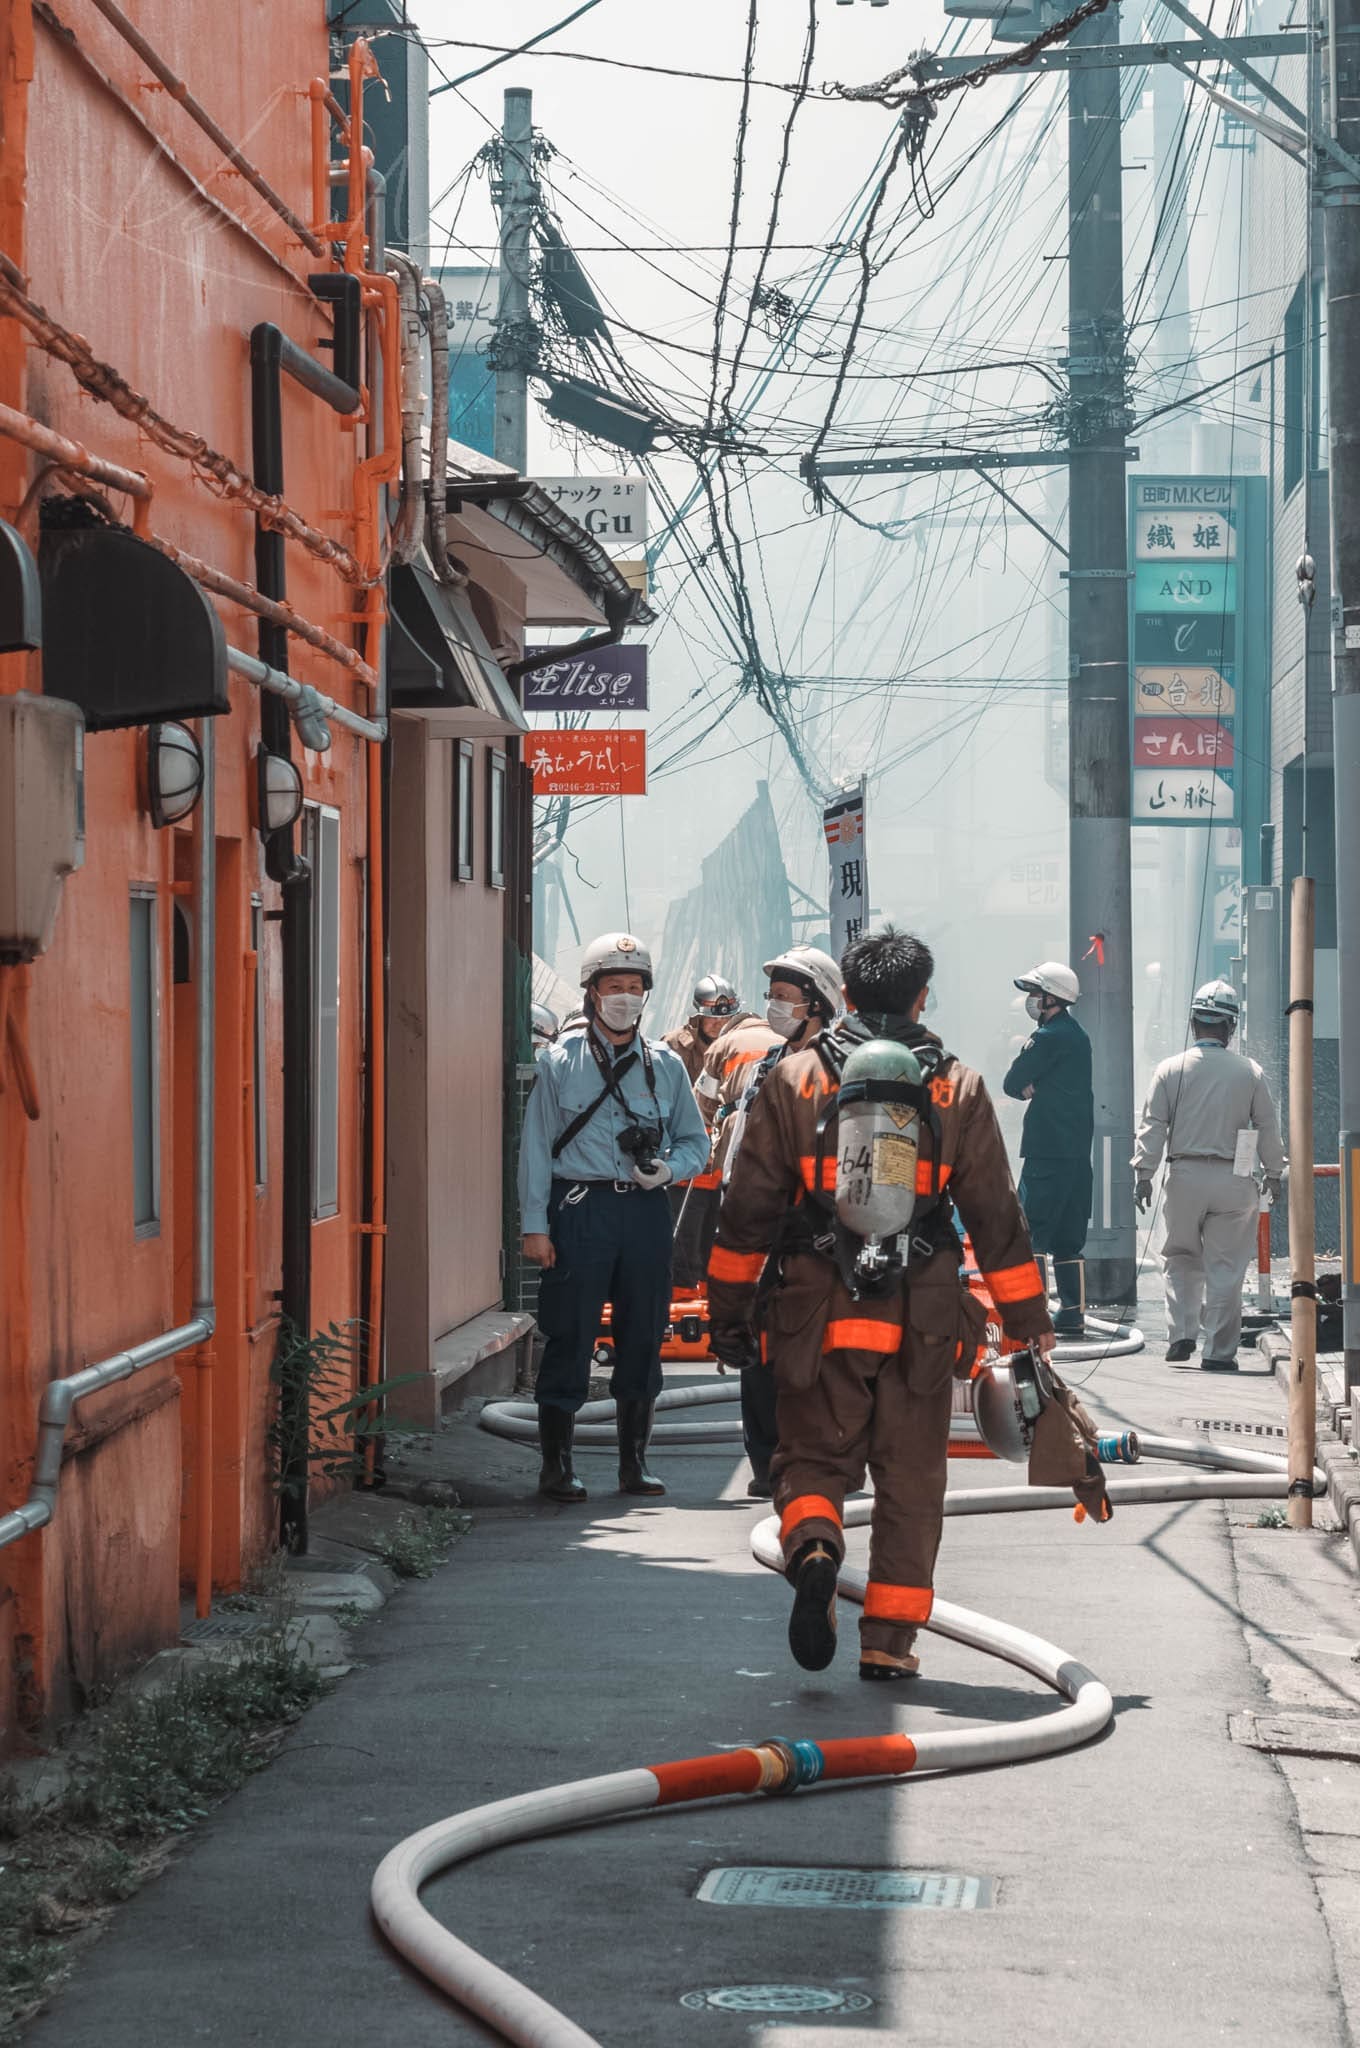 Firefighter in action in a Japan back alley.